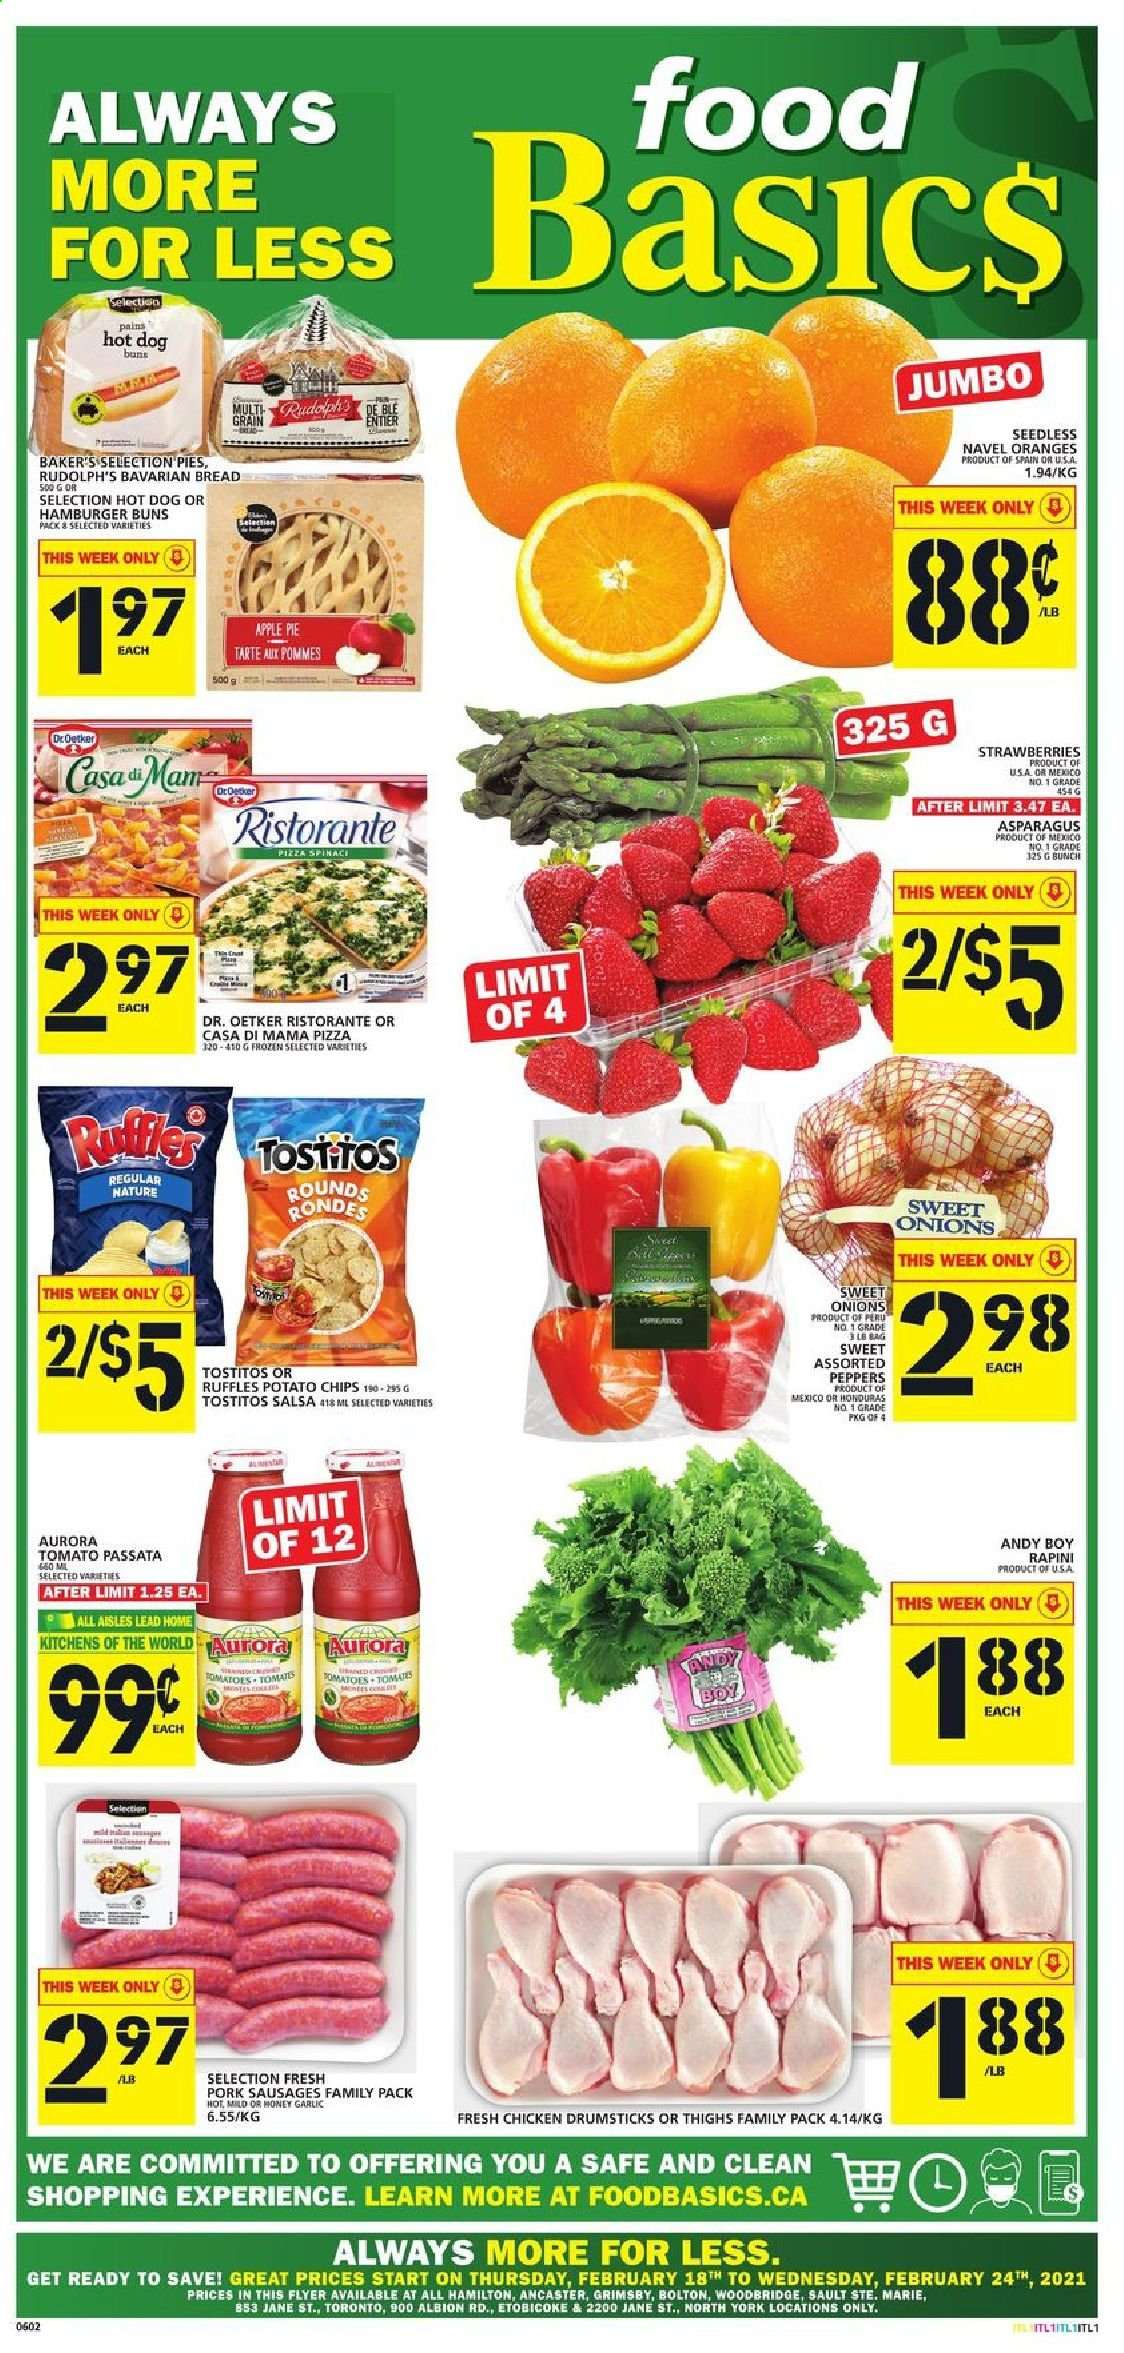 thumbnail - Food Basics Flyer - February 18, 2021 - February 24, 2021 - Sales products - bread, pie, buns, burger buns, apple pie, asparagus, garlic, peppers, strawberries, navel oranges, pizza, sausage, Dr. Oetker, potato chips, Ruffles, Tostitos, tomato sauce, salsa, chicken drumsticks, chicken, chips. Page 1.